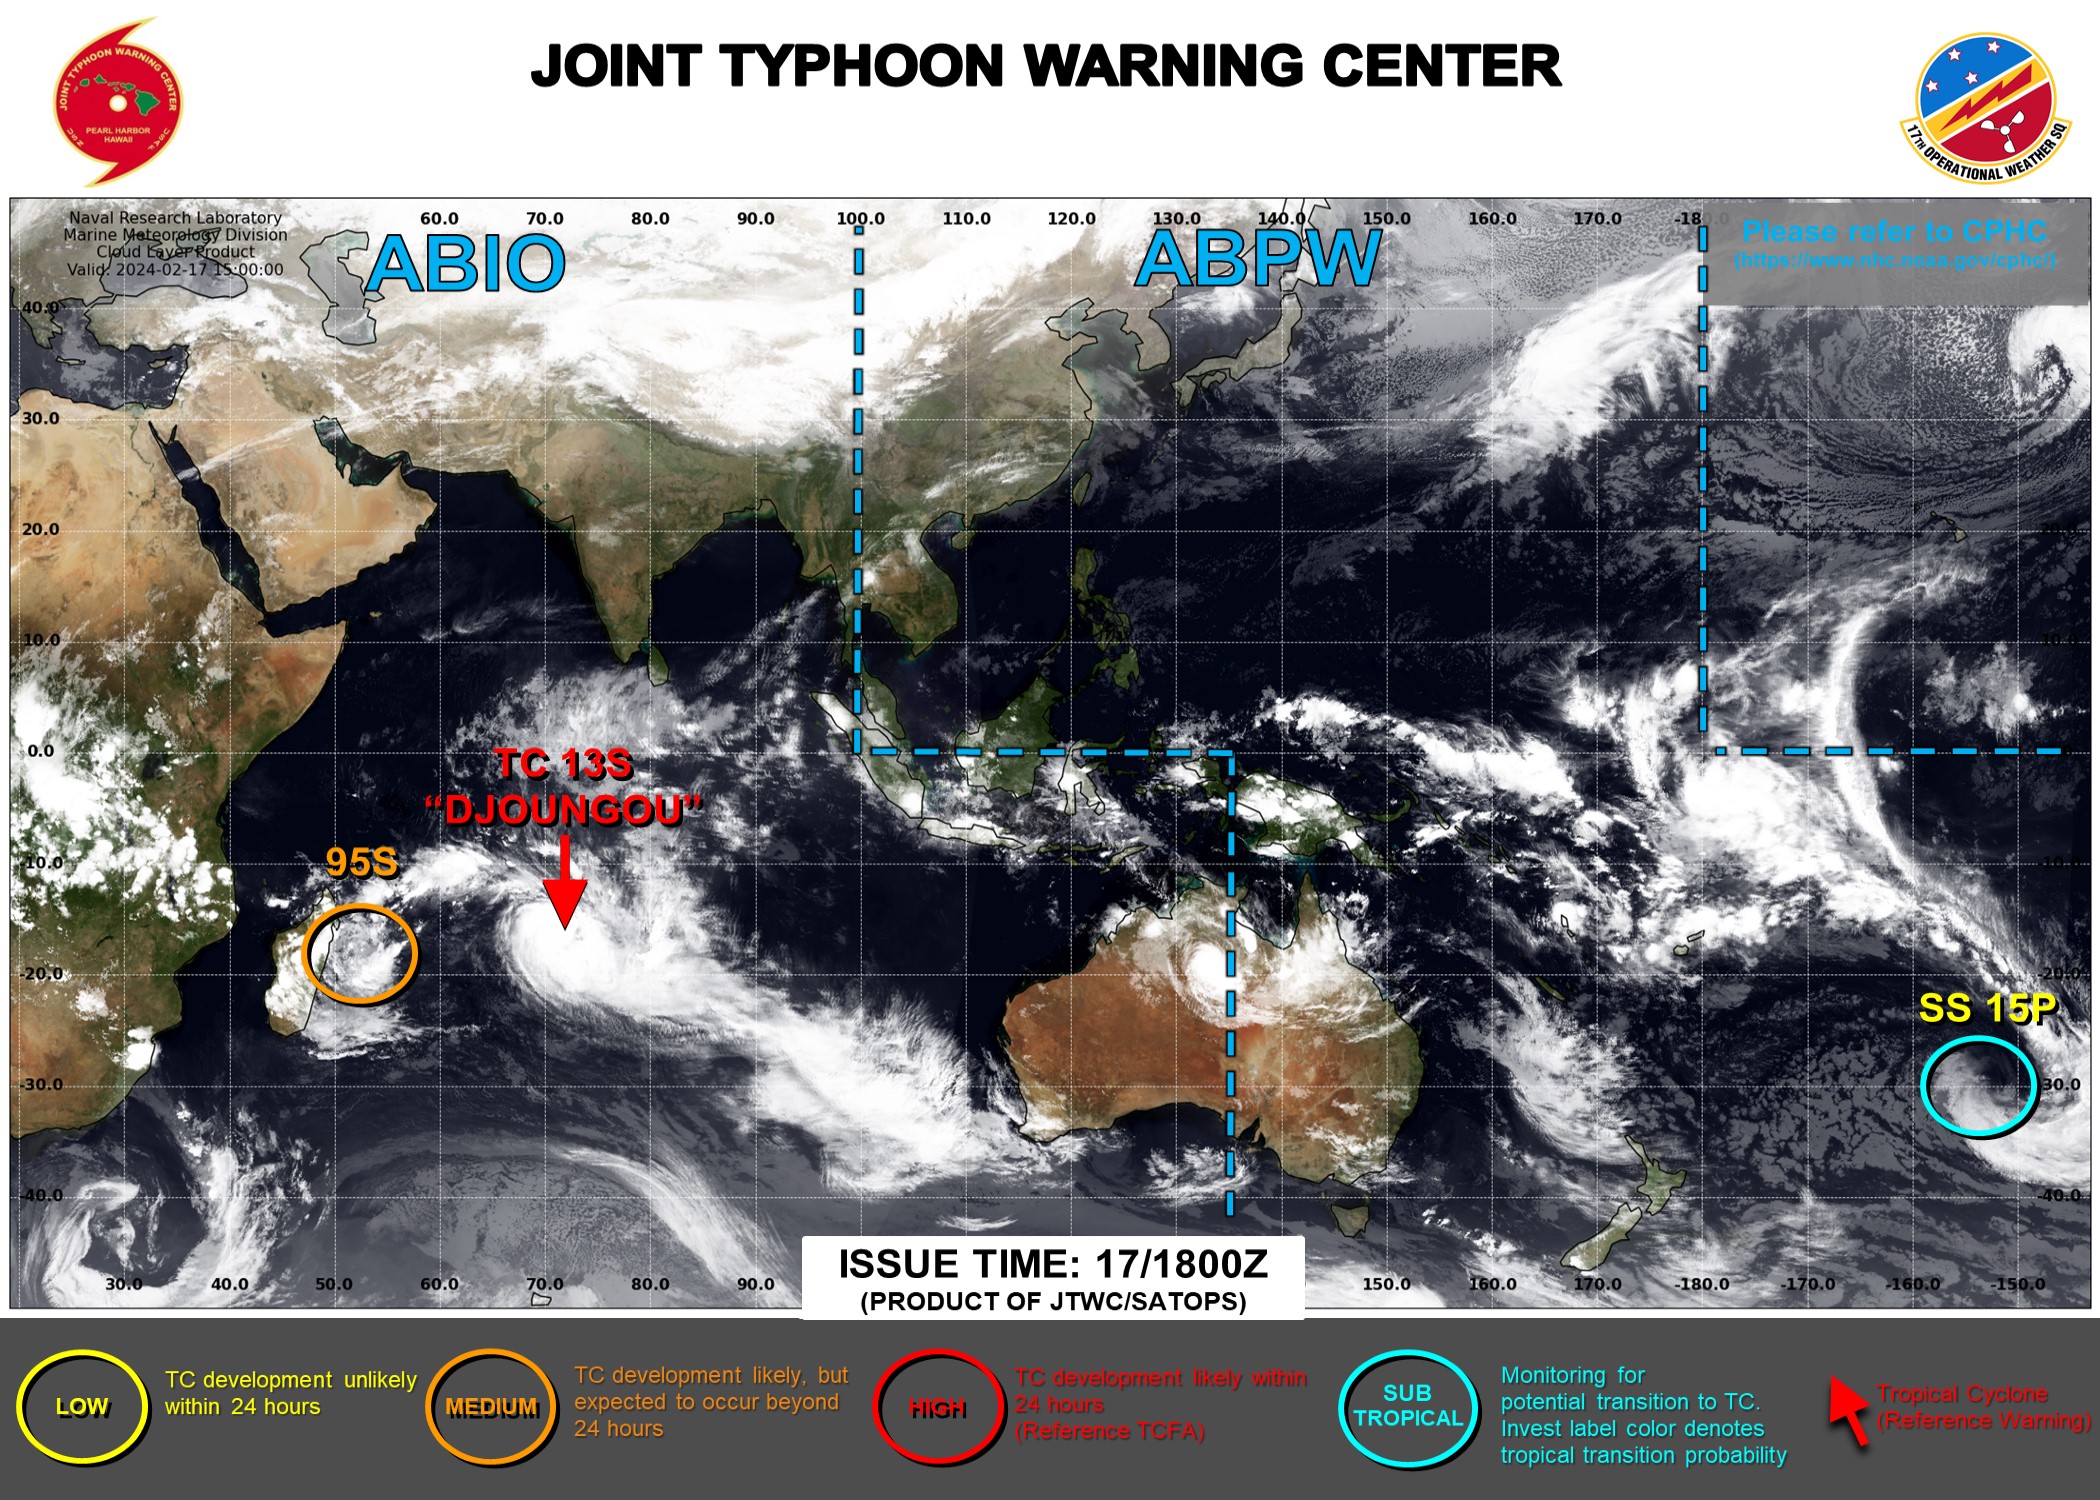 JTWC IS ISSUING 12HOURLY WARNINGS AND 3HOURLY SATELLITE BULLETINS ON TC 13S. 3HOURLY SATELLITE BULLETINS ARE ISSUED ON SUBTROPICAL 15P AND ON THE OVERLAND REMNANTS OF TC 14P.